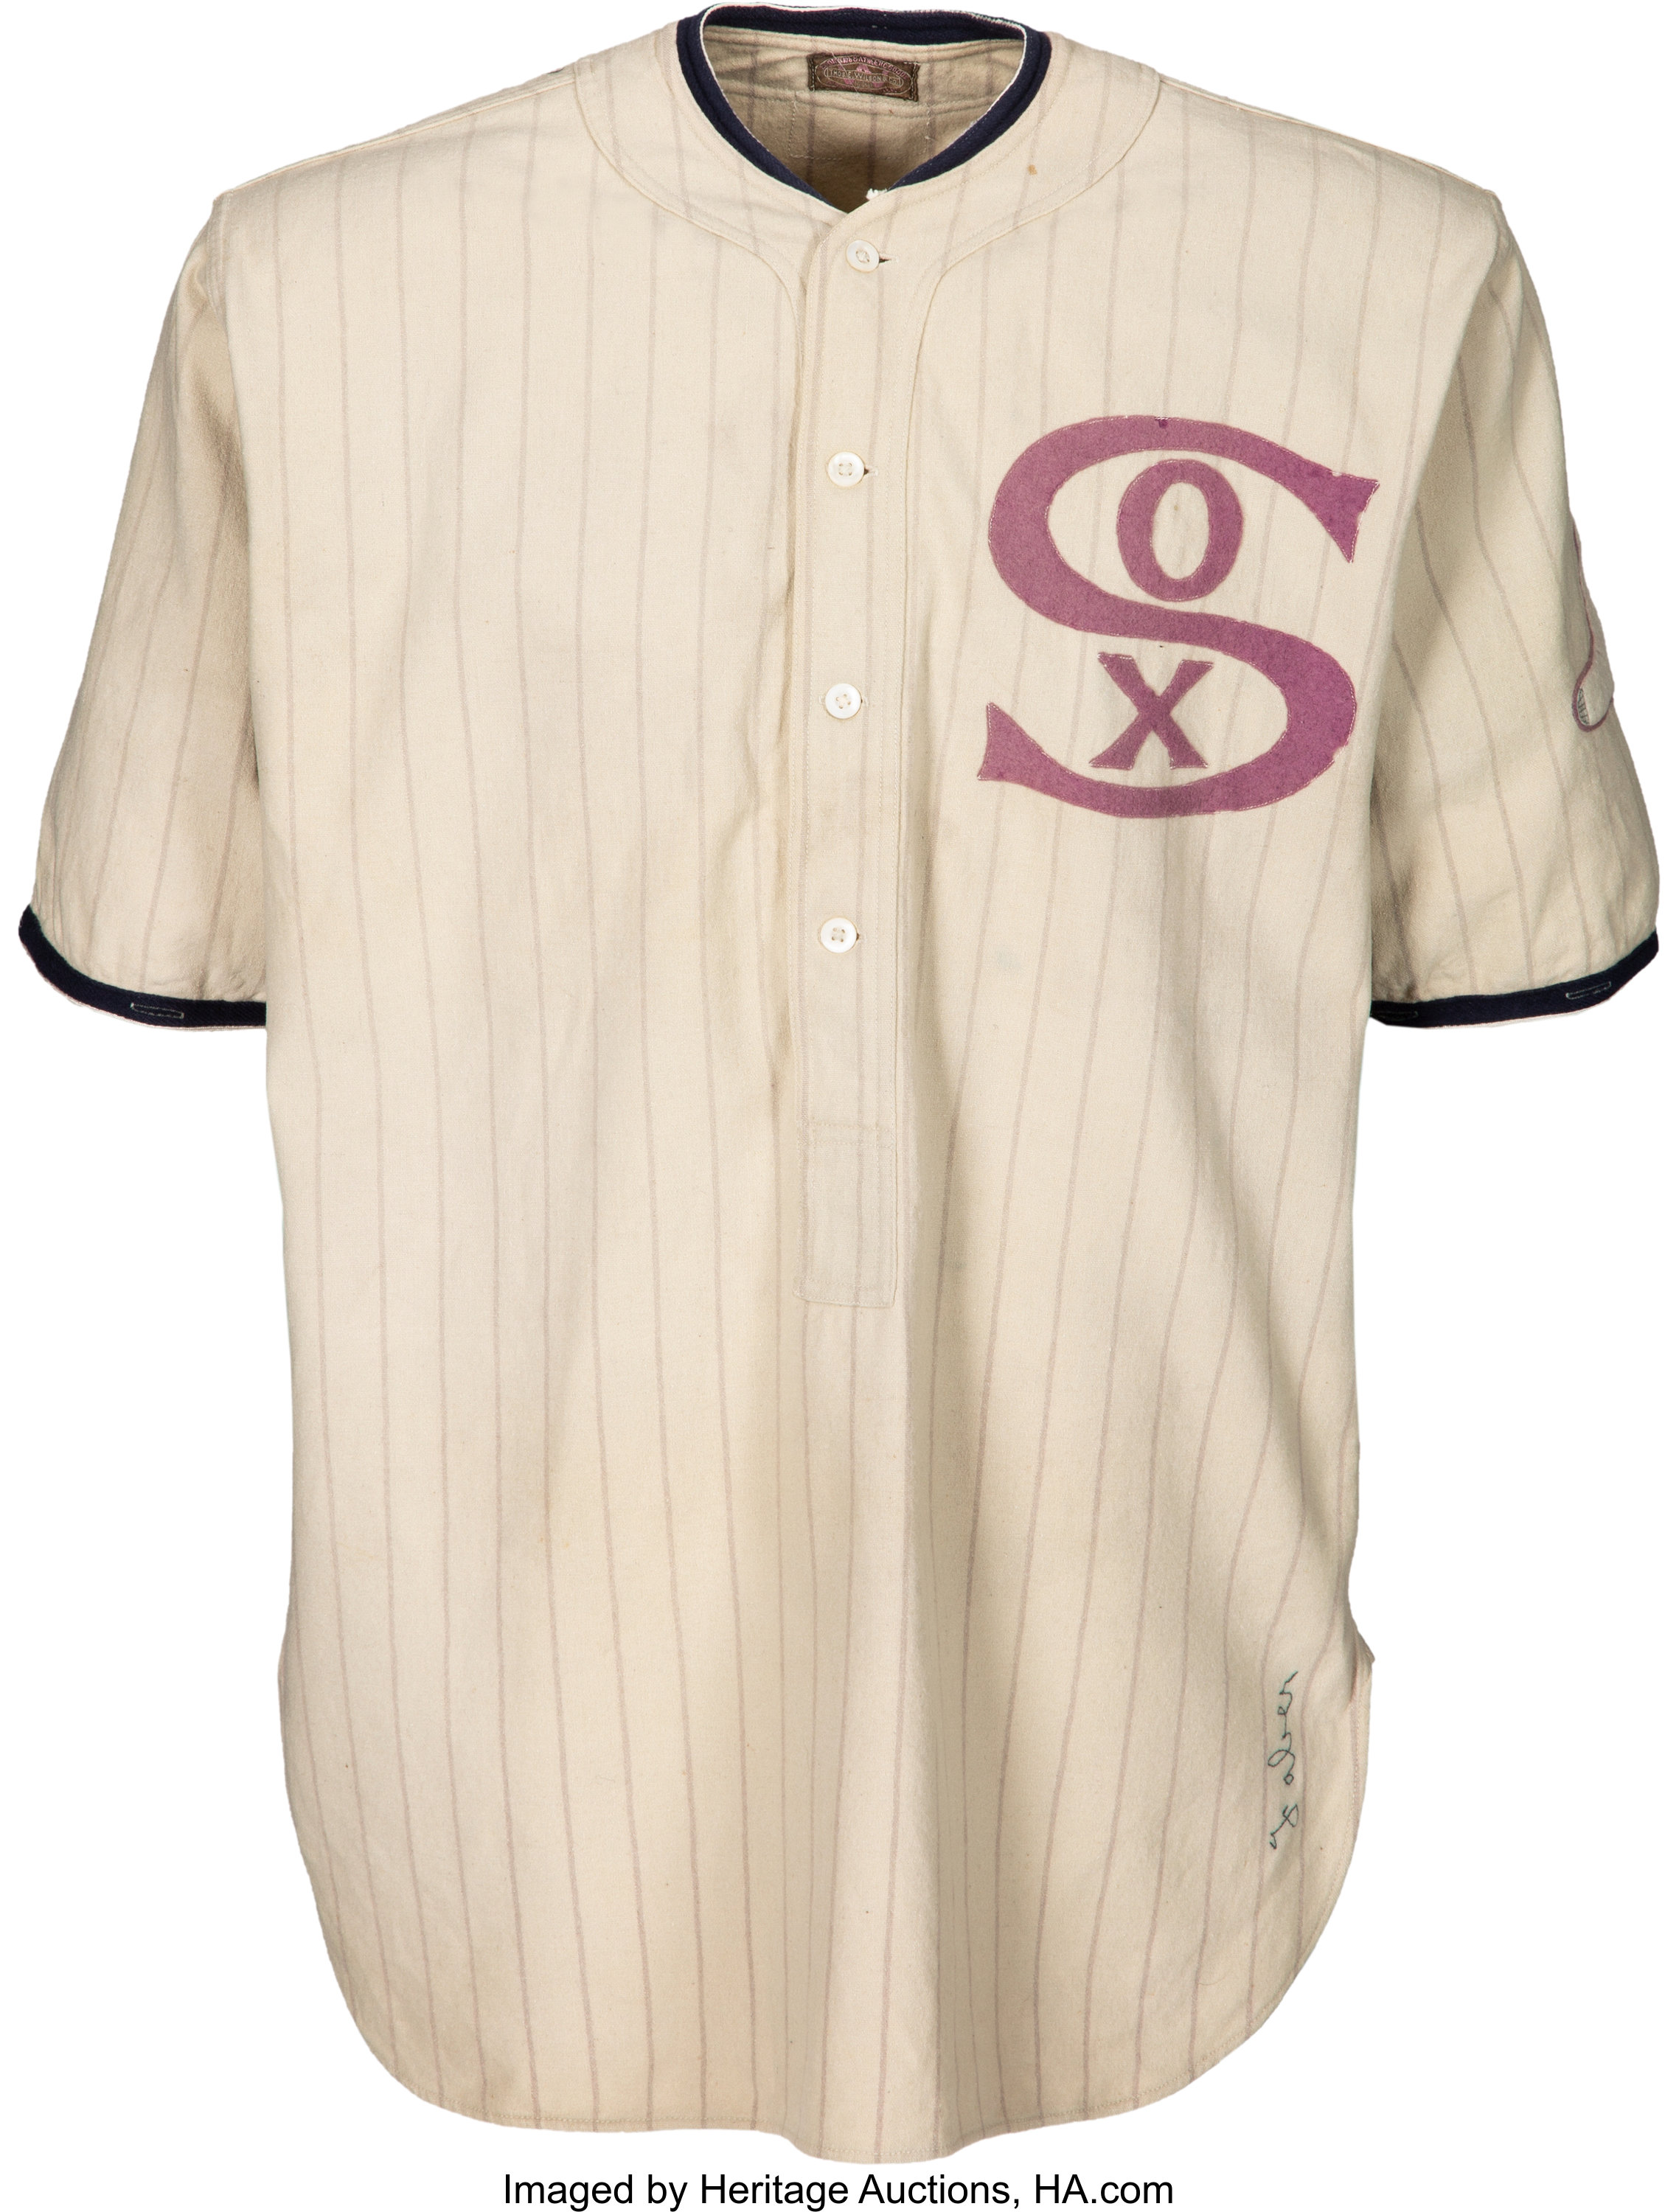 New White Sox jersey is an homage to the 1919 White Sox